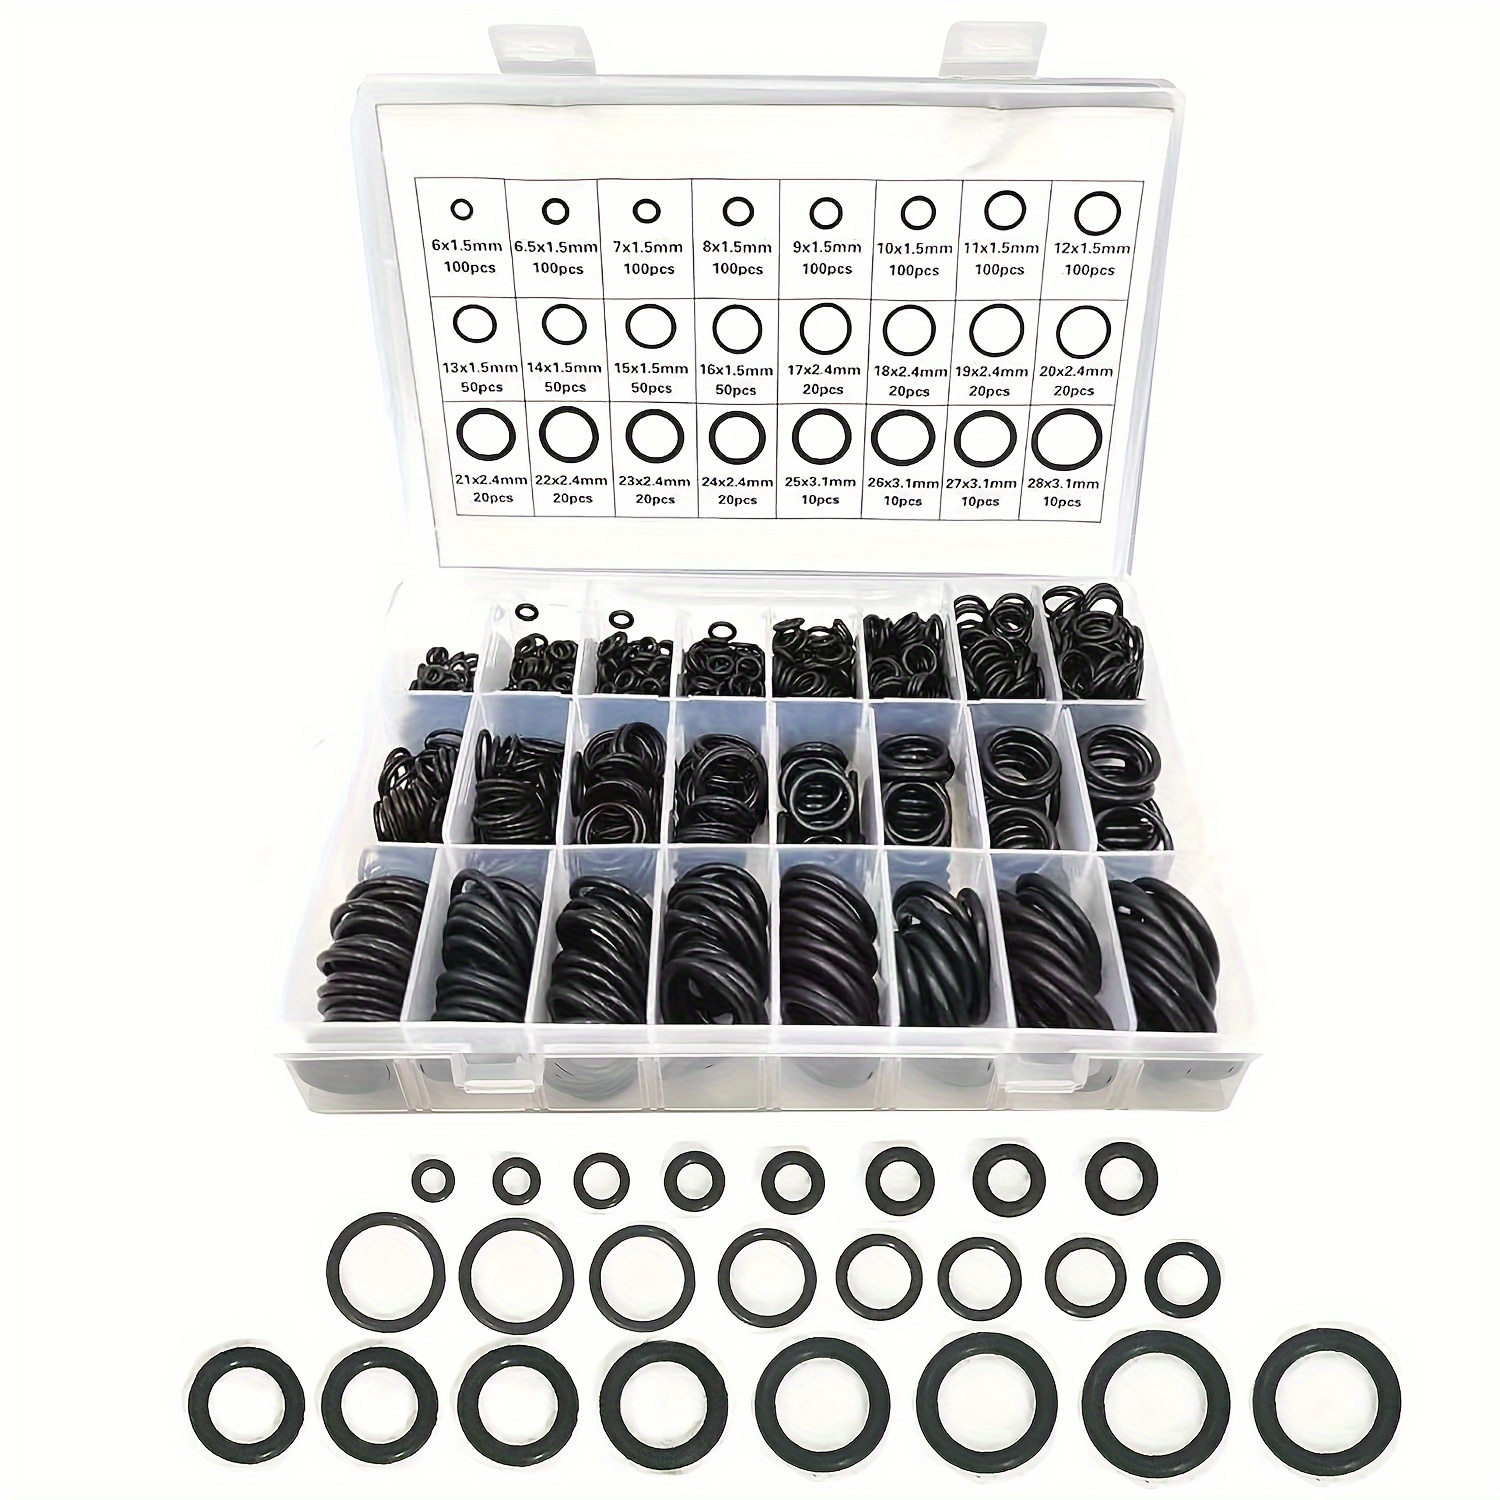 

1200-piece Nbr Rubber O-ring Kit - Curved Retaining Washers Assortment For Plumbing, Gas, Automotive, And Faucet Repair, Oil-resistant And Heat-resistant Sealing Washers, Metric Sizes